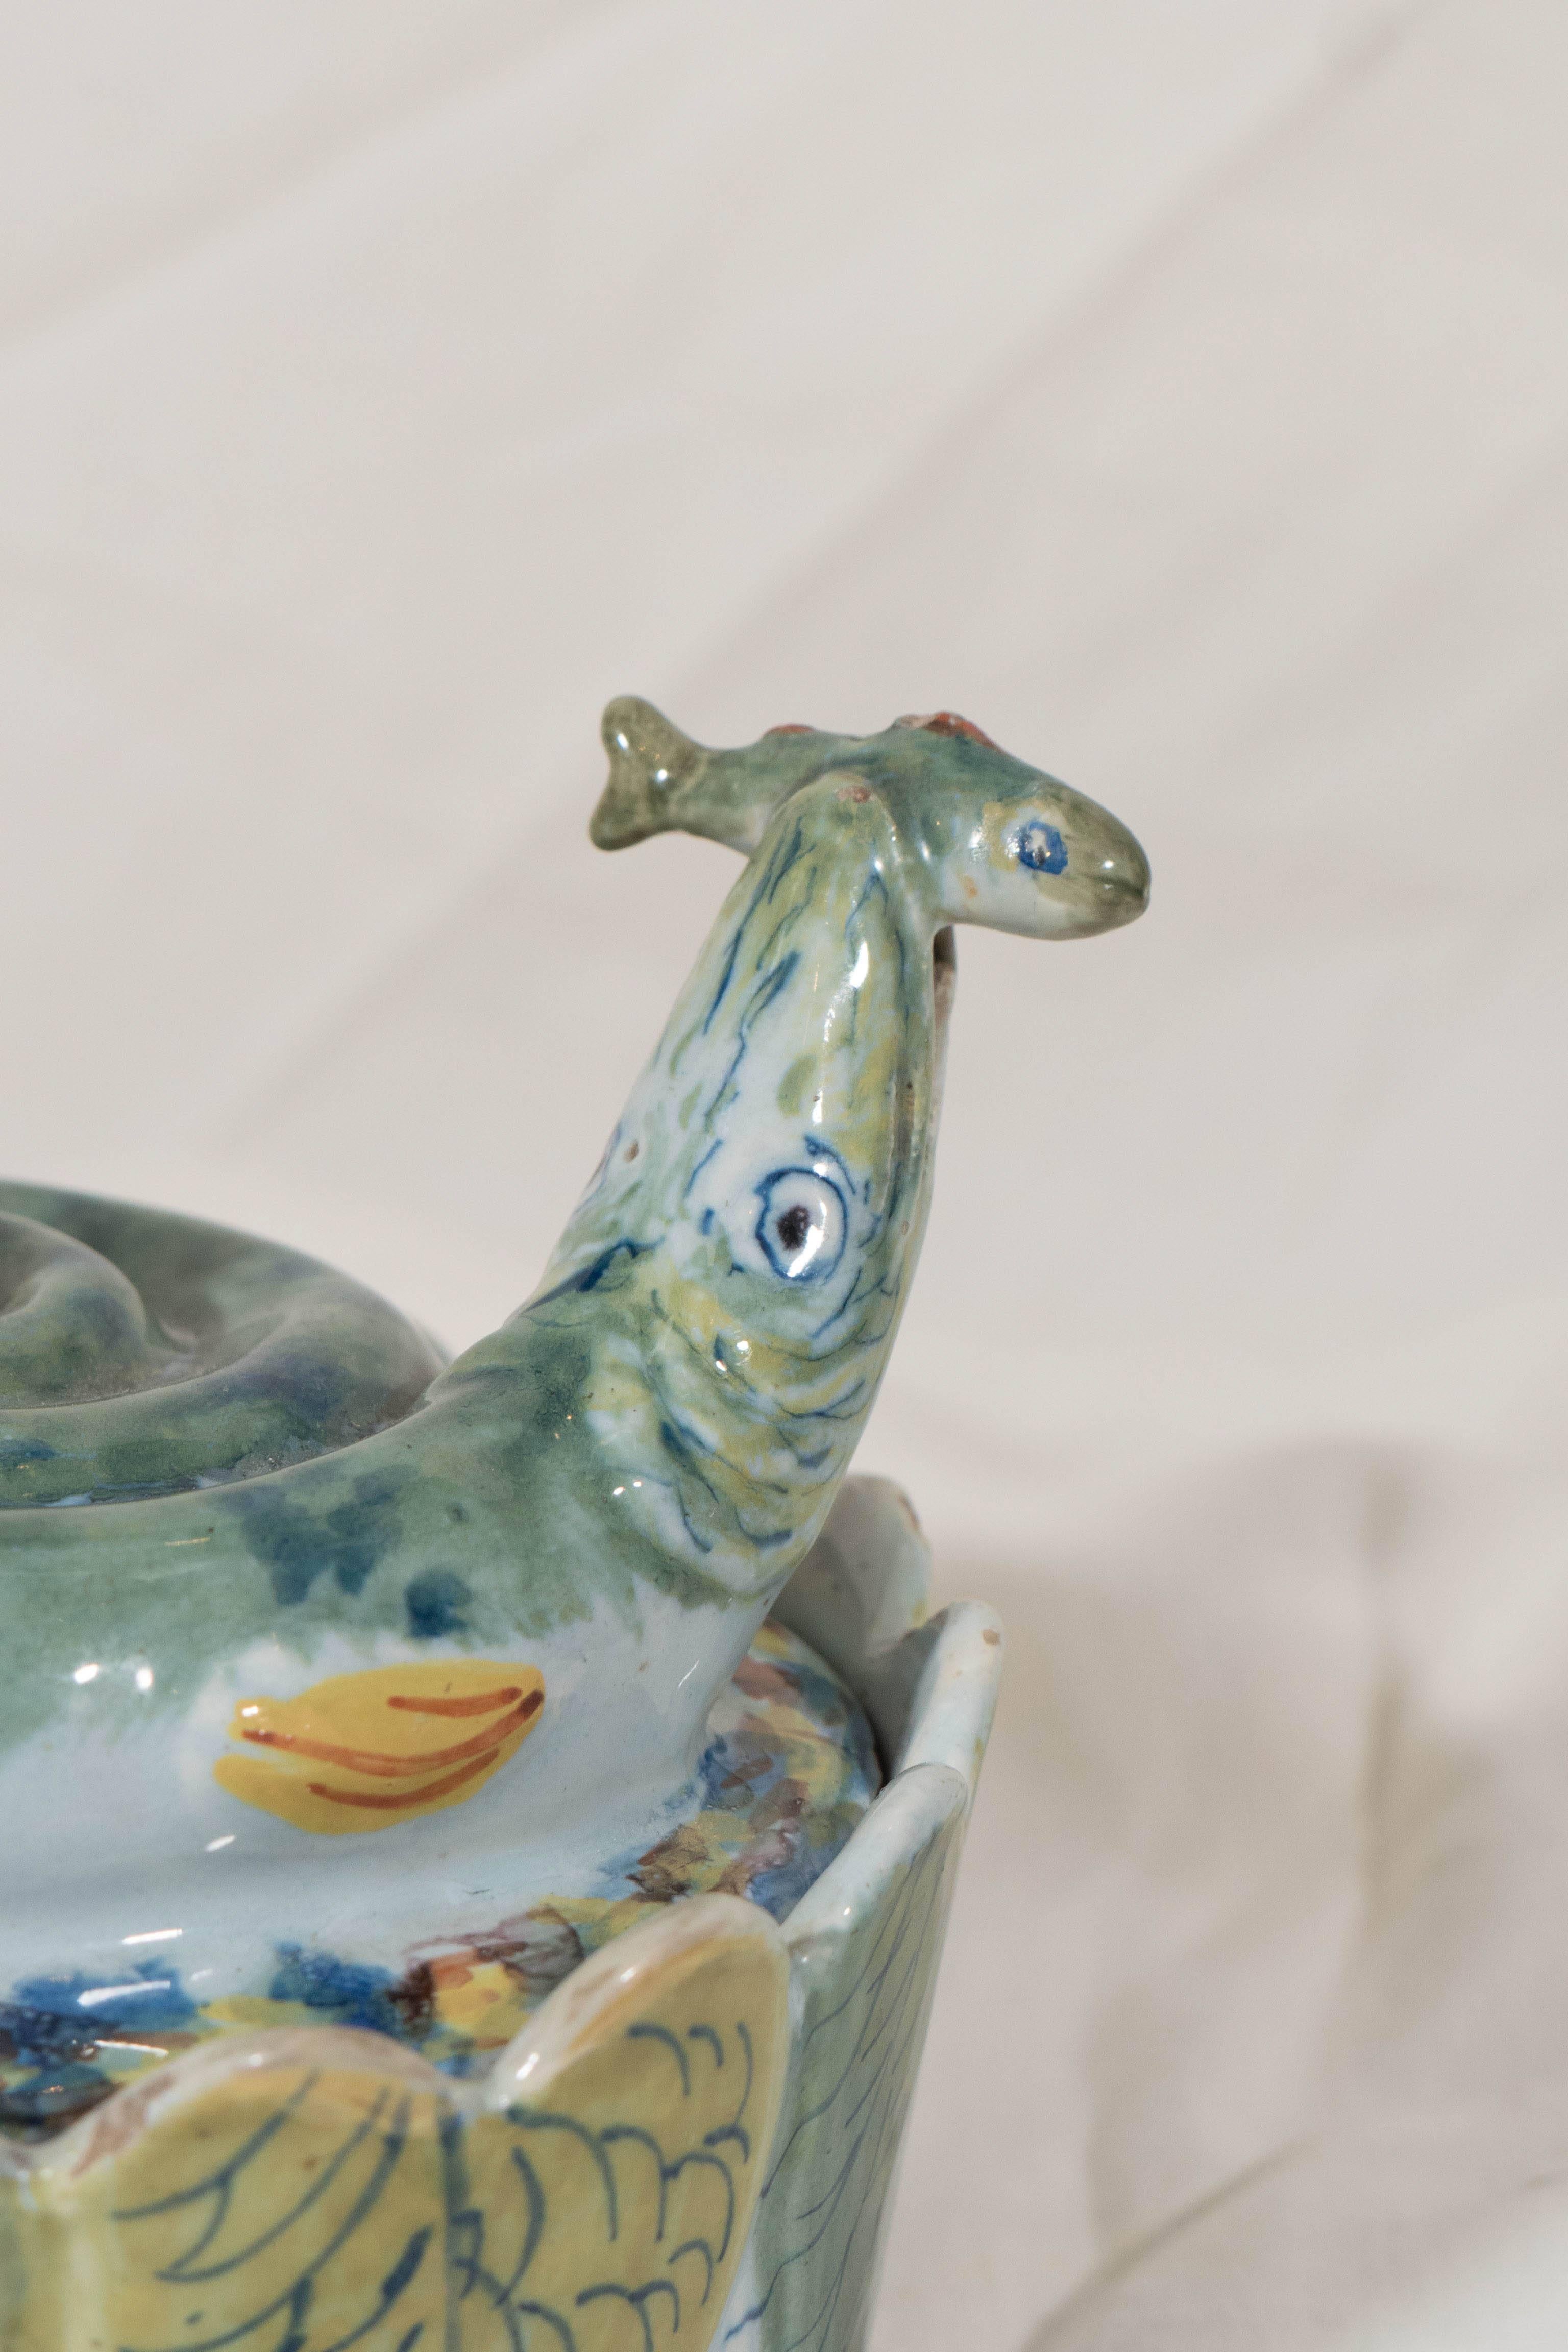 An 18th century Dutch Delft dish and cover painted predominantly in soft greens and blues. The cover is modeled as a curled pike about to swallow a small fish. The pike's raised tail forms the cover's knop. The circular bowl is beautifully molded